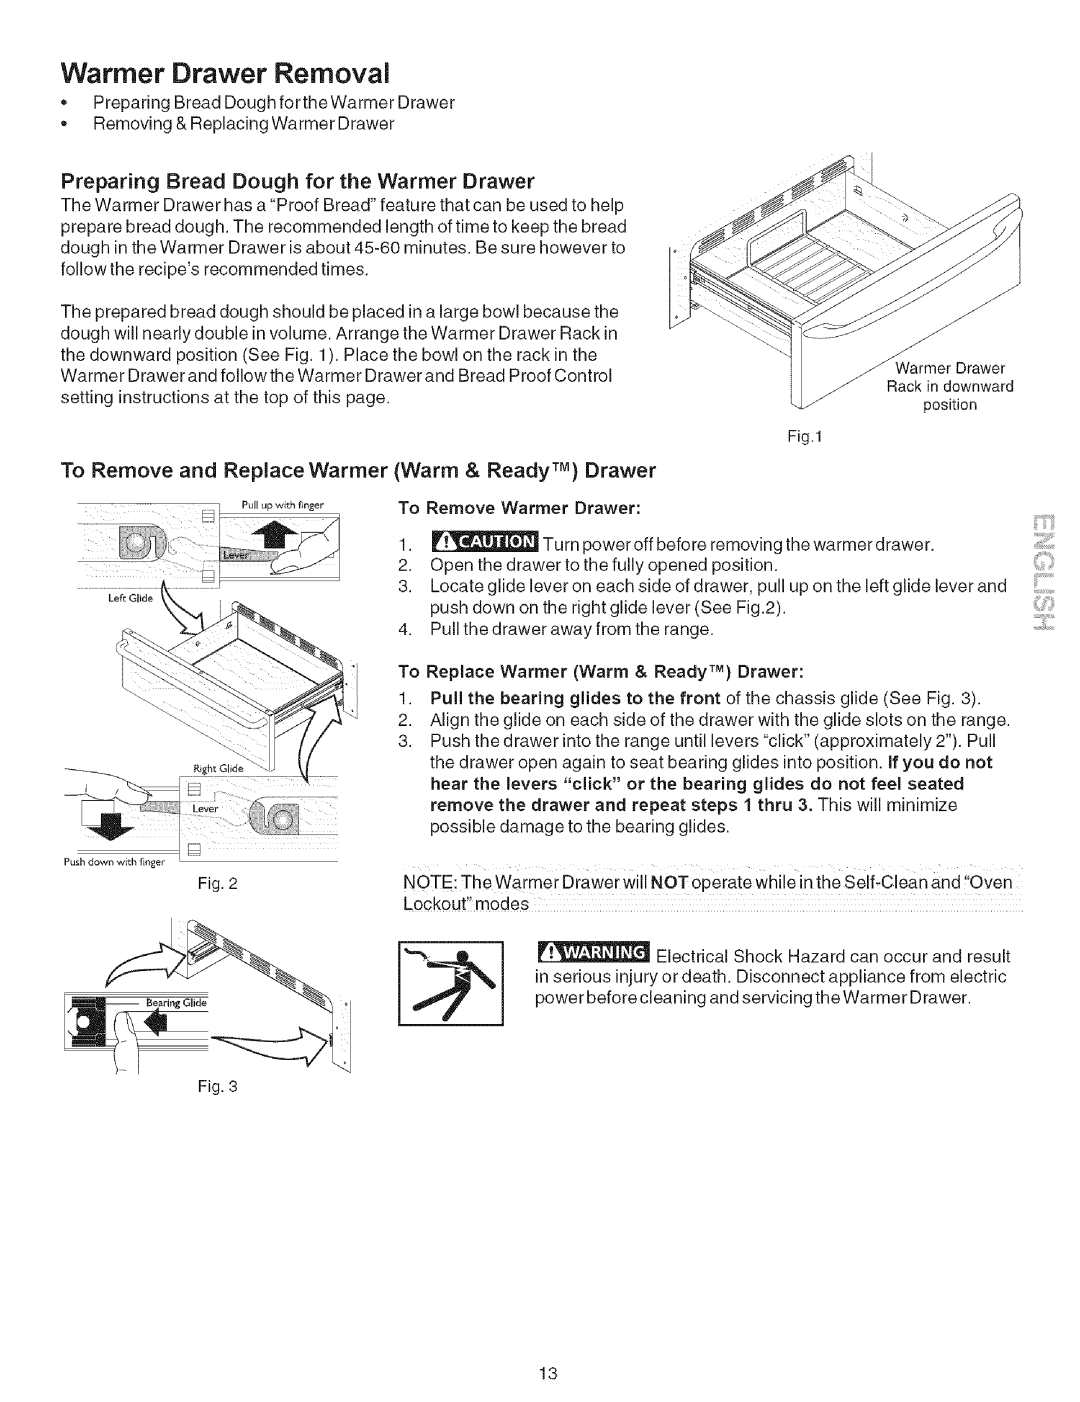 Kenmore 790.7946 manual Warmer Drawer Removal, Preparing Bread Dough for the Warmer Drawer 